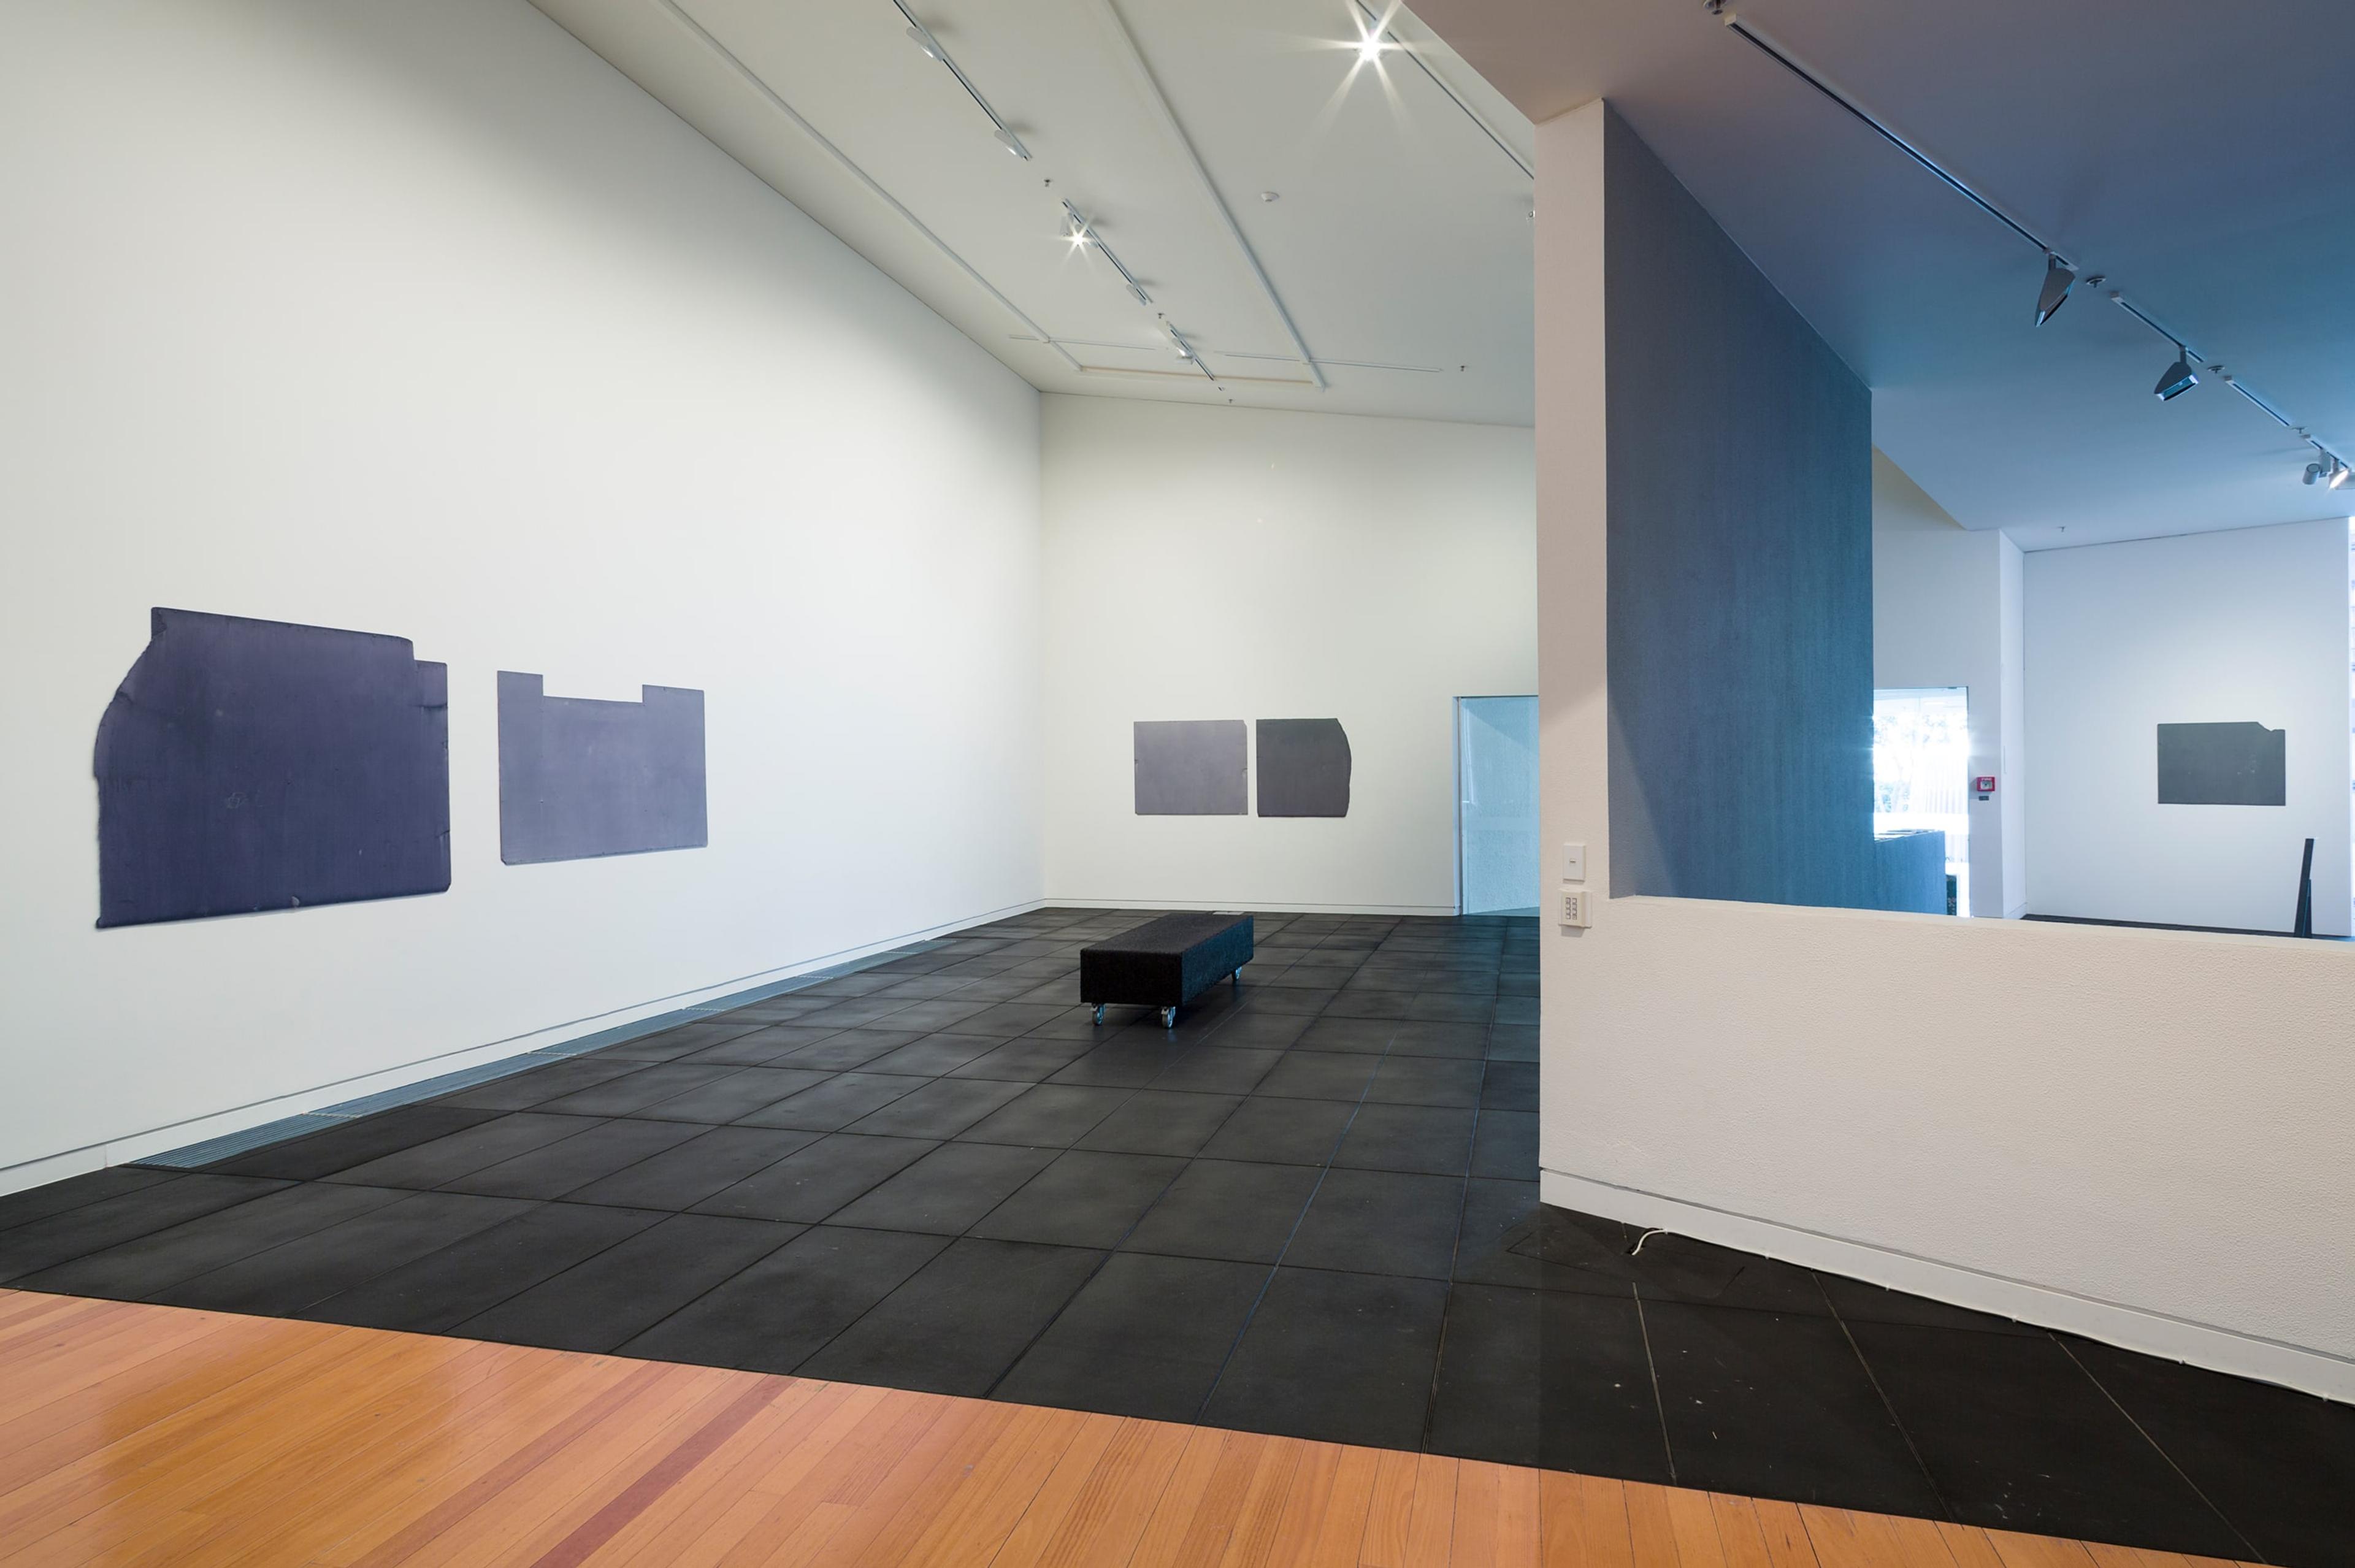 Installation view of paintings from the mallarmé suite (2013) in the exhibition what is a life? kim Pieters at the Adam Art Gallery, Victoria University of Wellington (photo: Shaun Waugh)